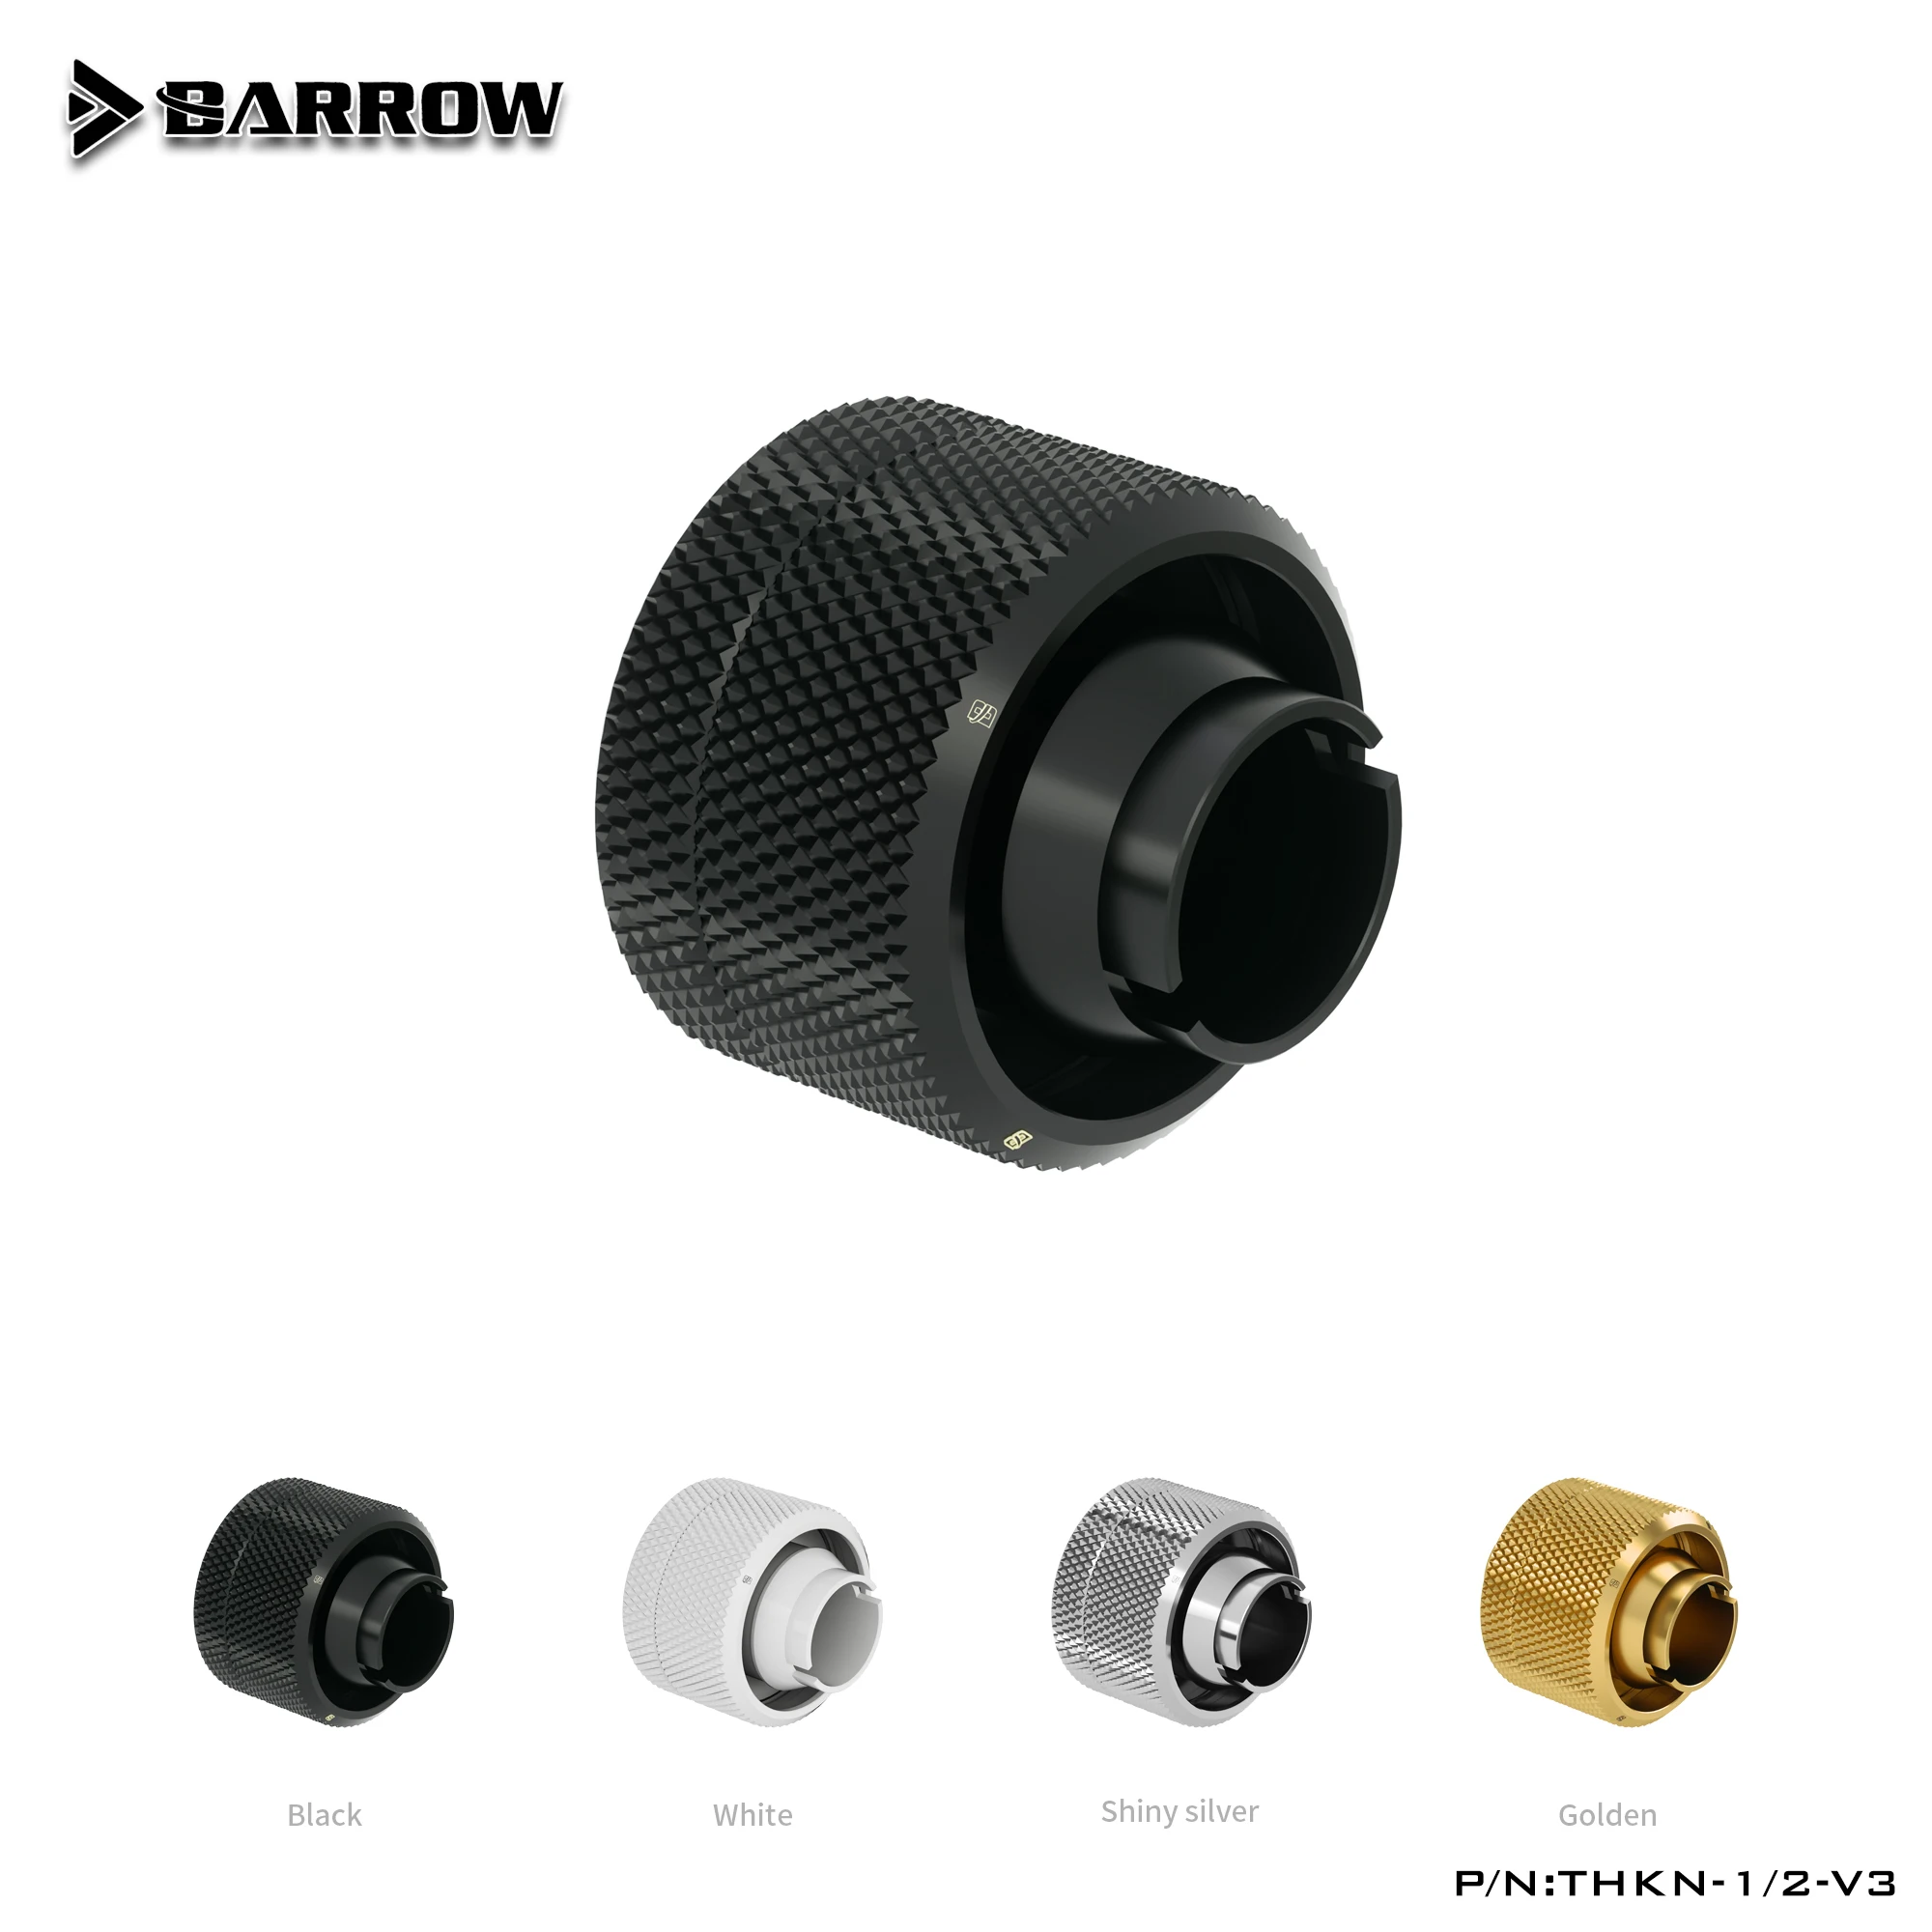 

Barrow White Black Silver G1 /4 1/2"ID X 3/4"OD 13 X 19mm Tubing Hand Compression Fittings Water Cooling Fitting THKN-1/2-V3